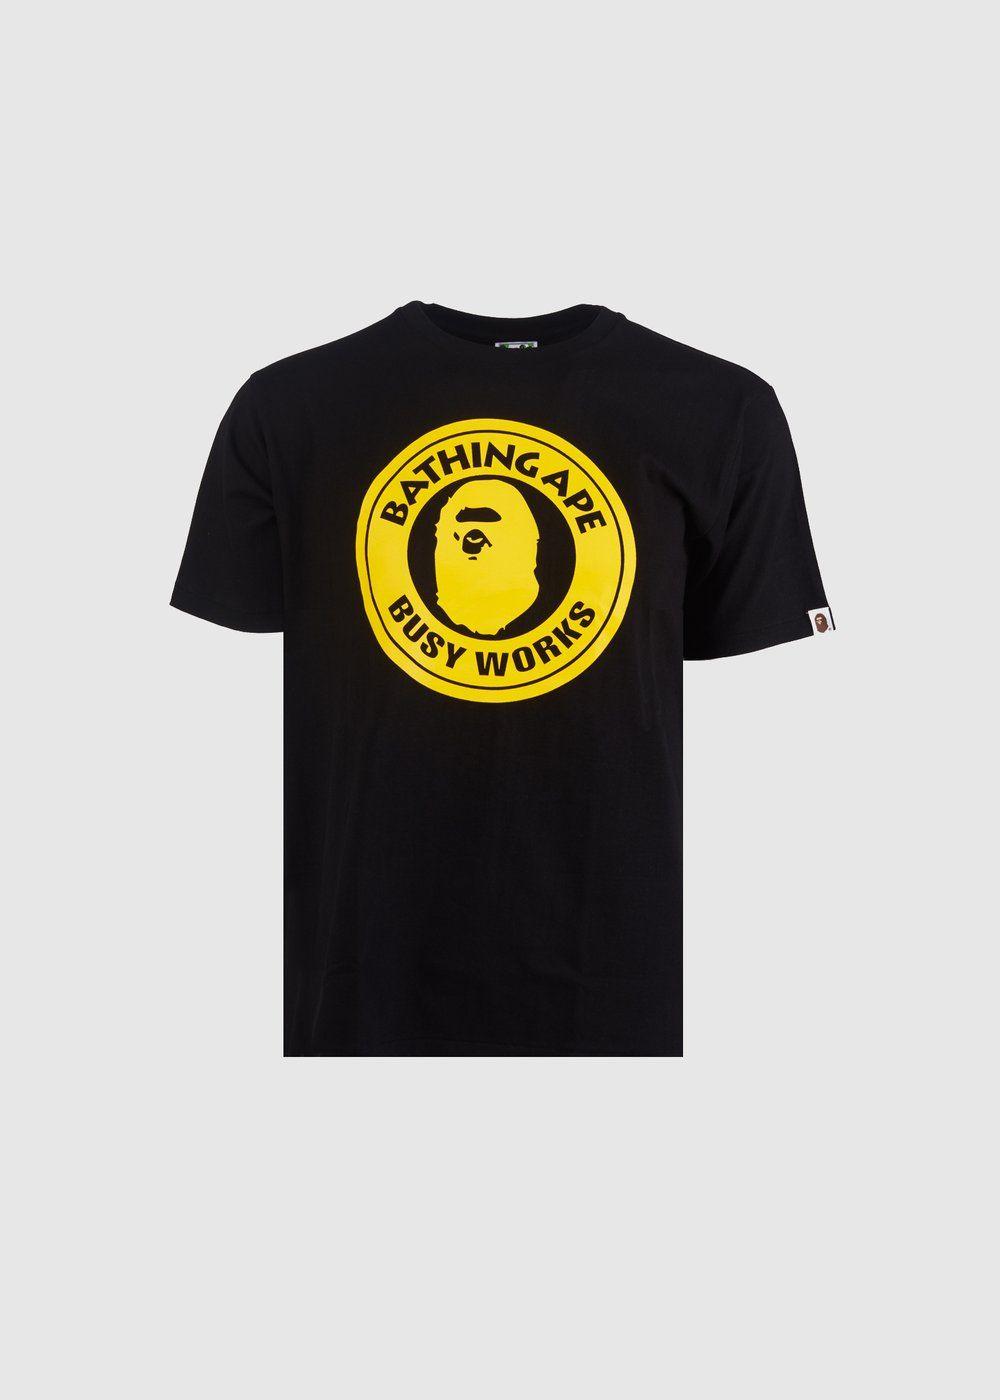 Work in Black and Yellow Logo - Bape: Bicolor Busy Works Tee [Black]